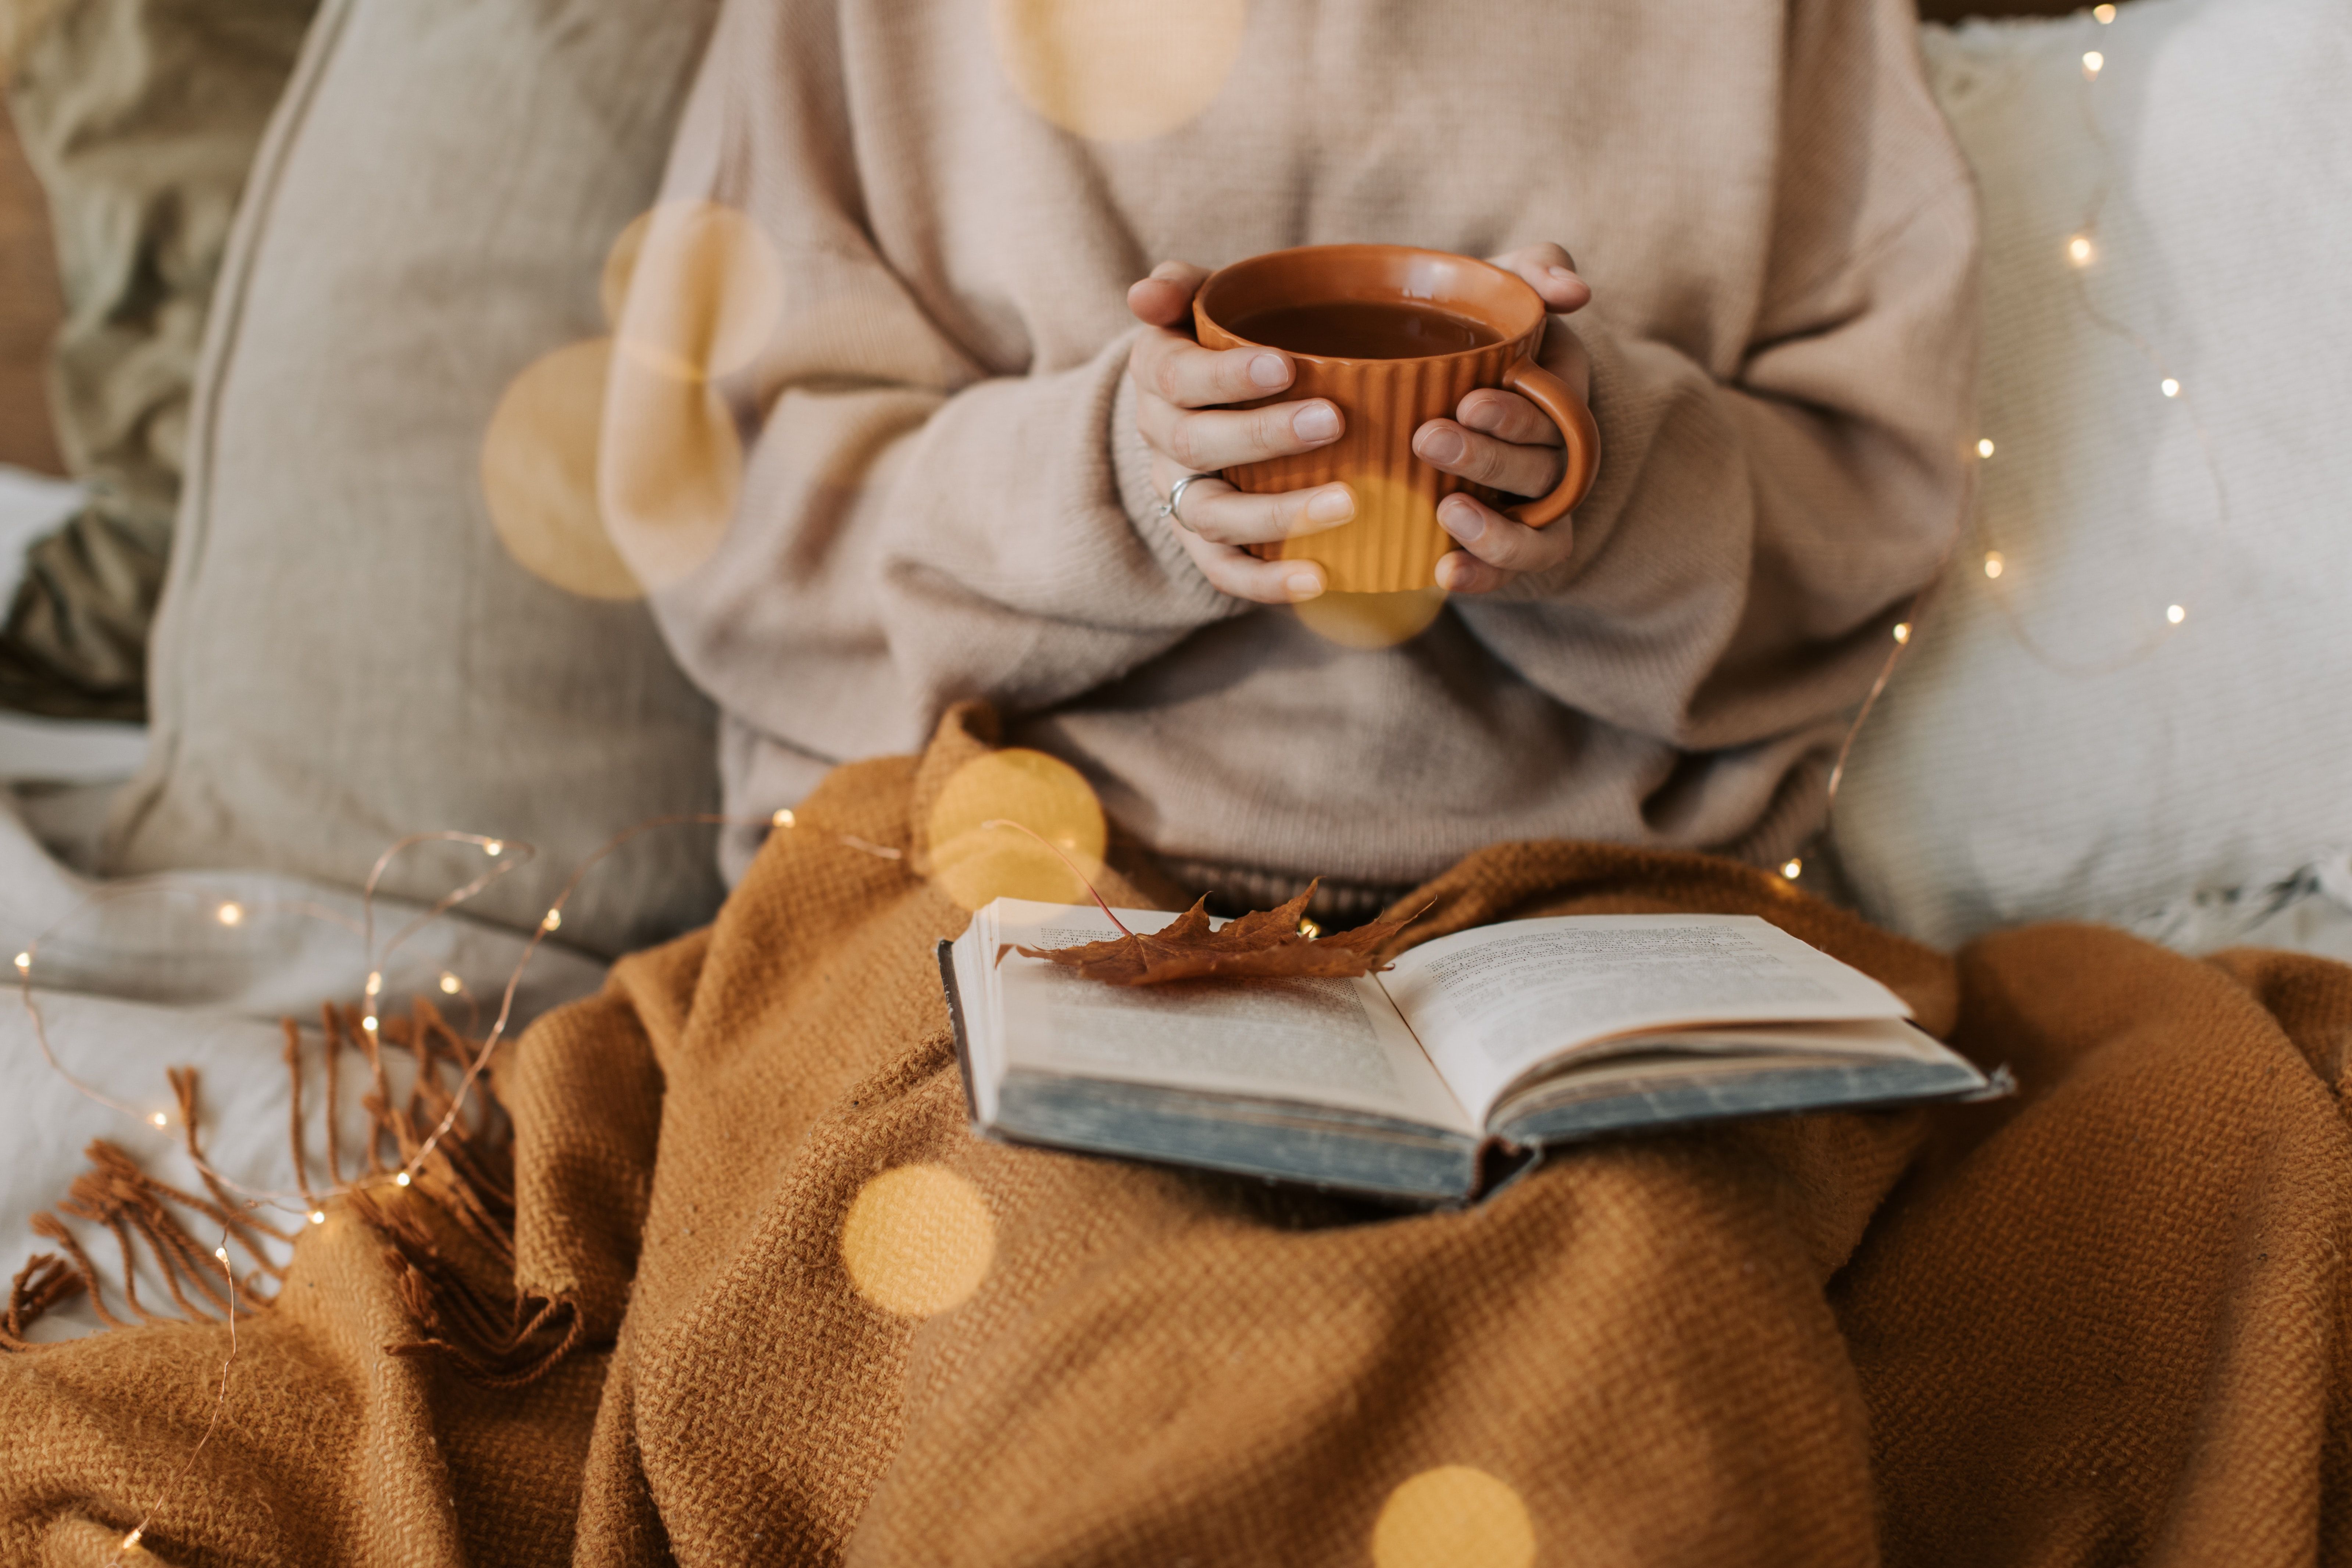 A person holding a cup of tea and a book - Books